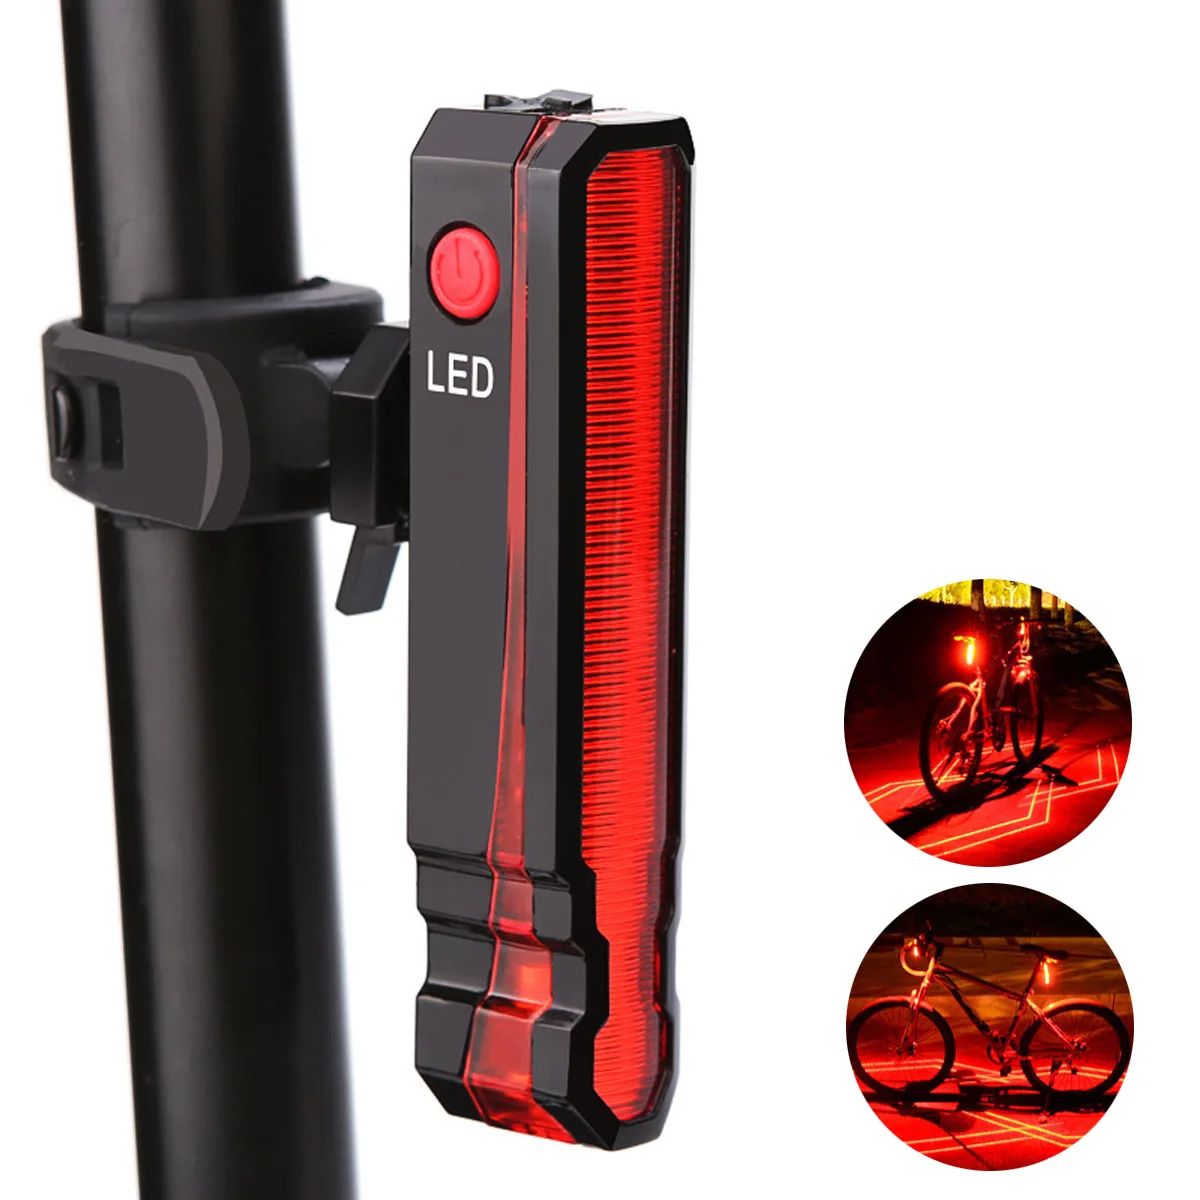 Bike Front Rear Cycling Lighting Laser Lights USB Rechargeable Bicycle Flashlight Lamp Set Taillight